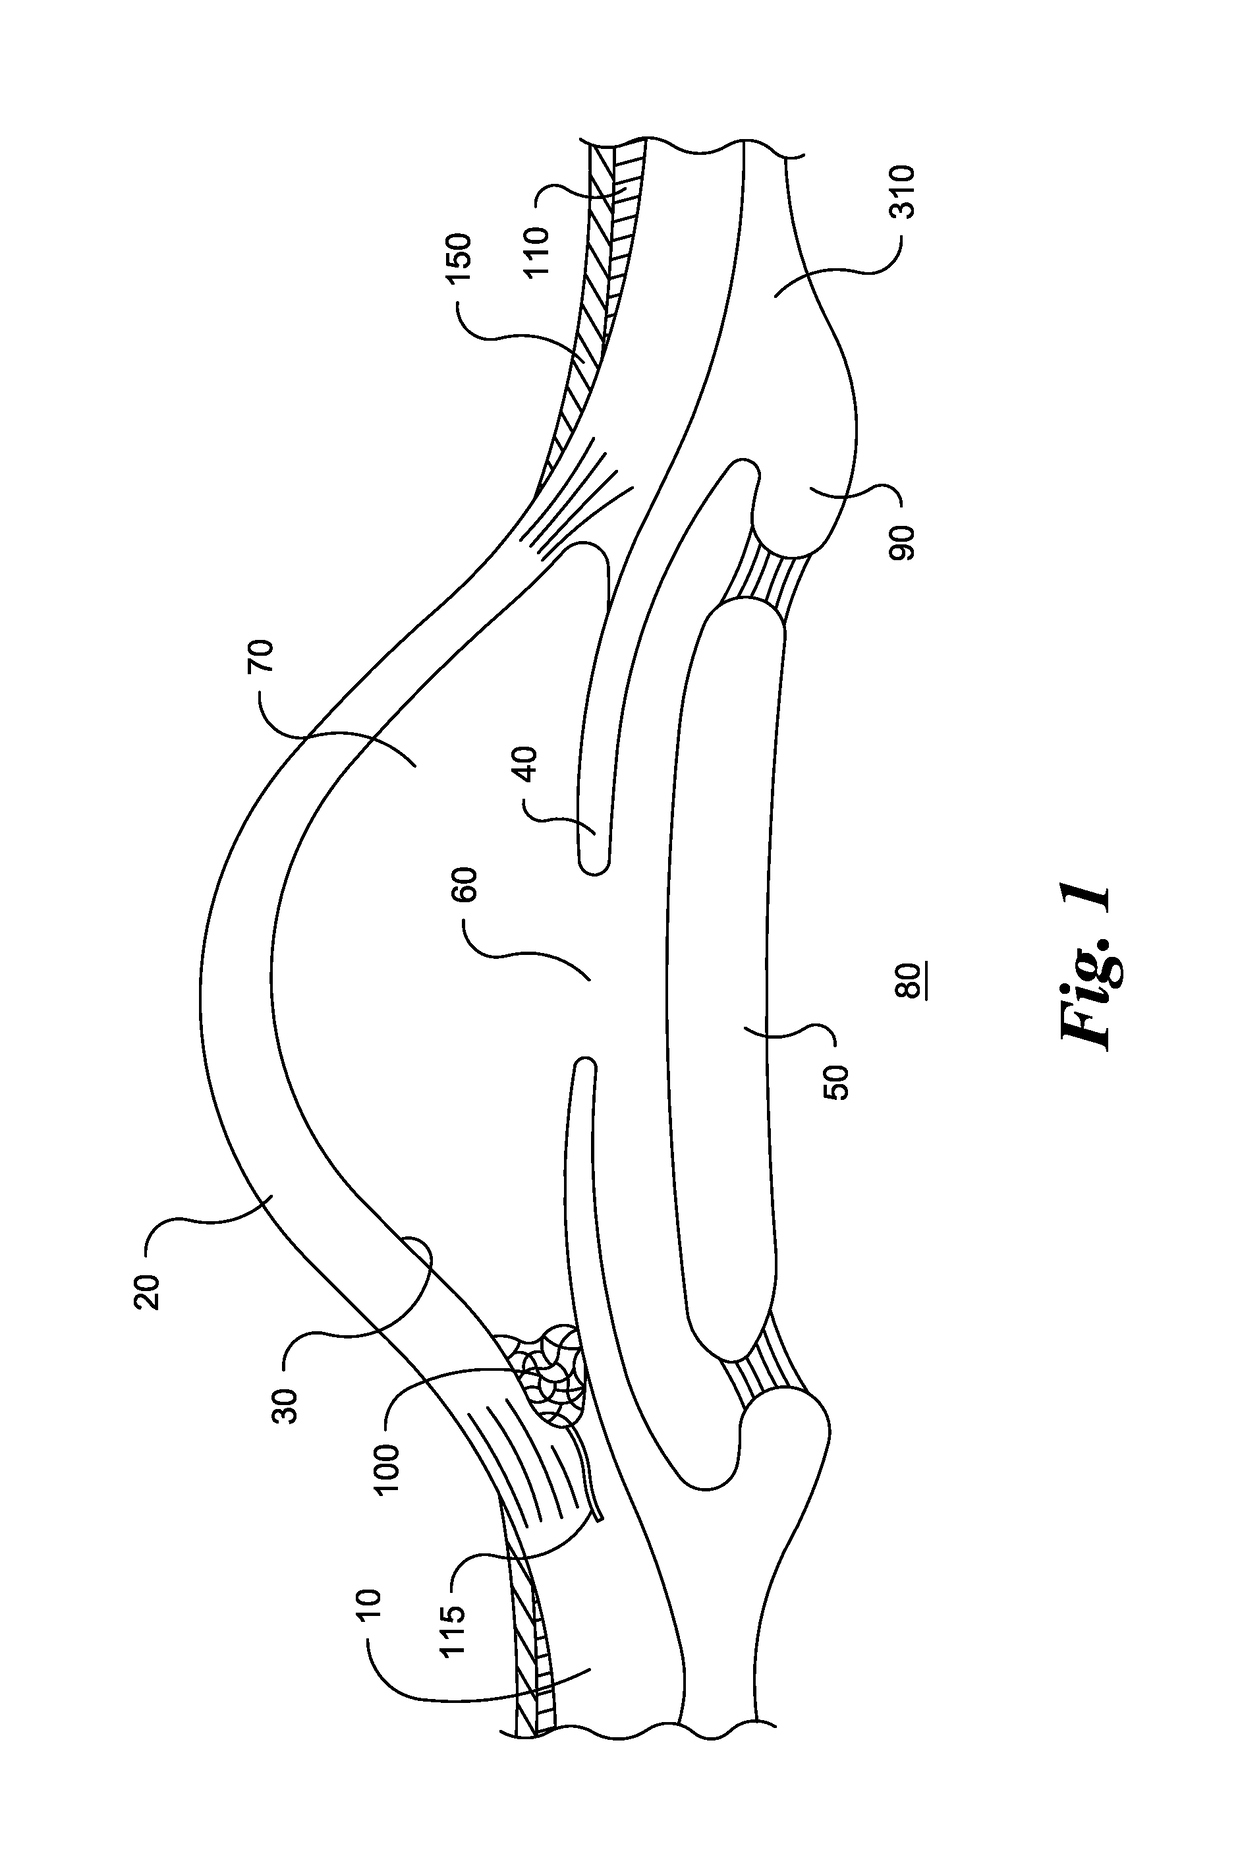 Eye implant devices and method and device for implanting such devices for treatment of glaucoma